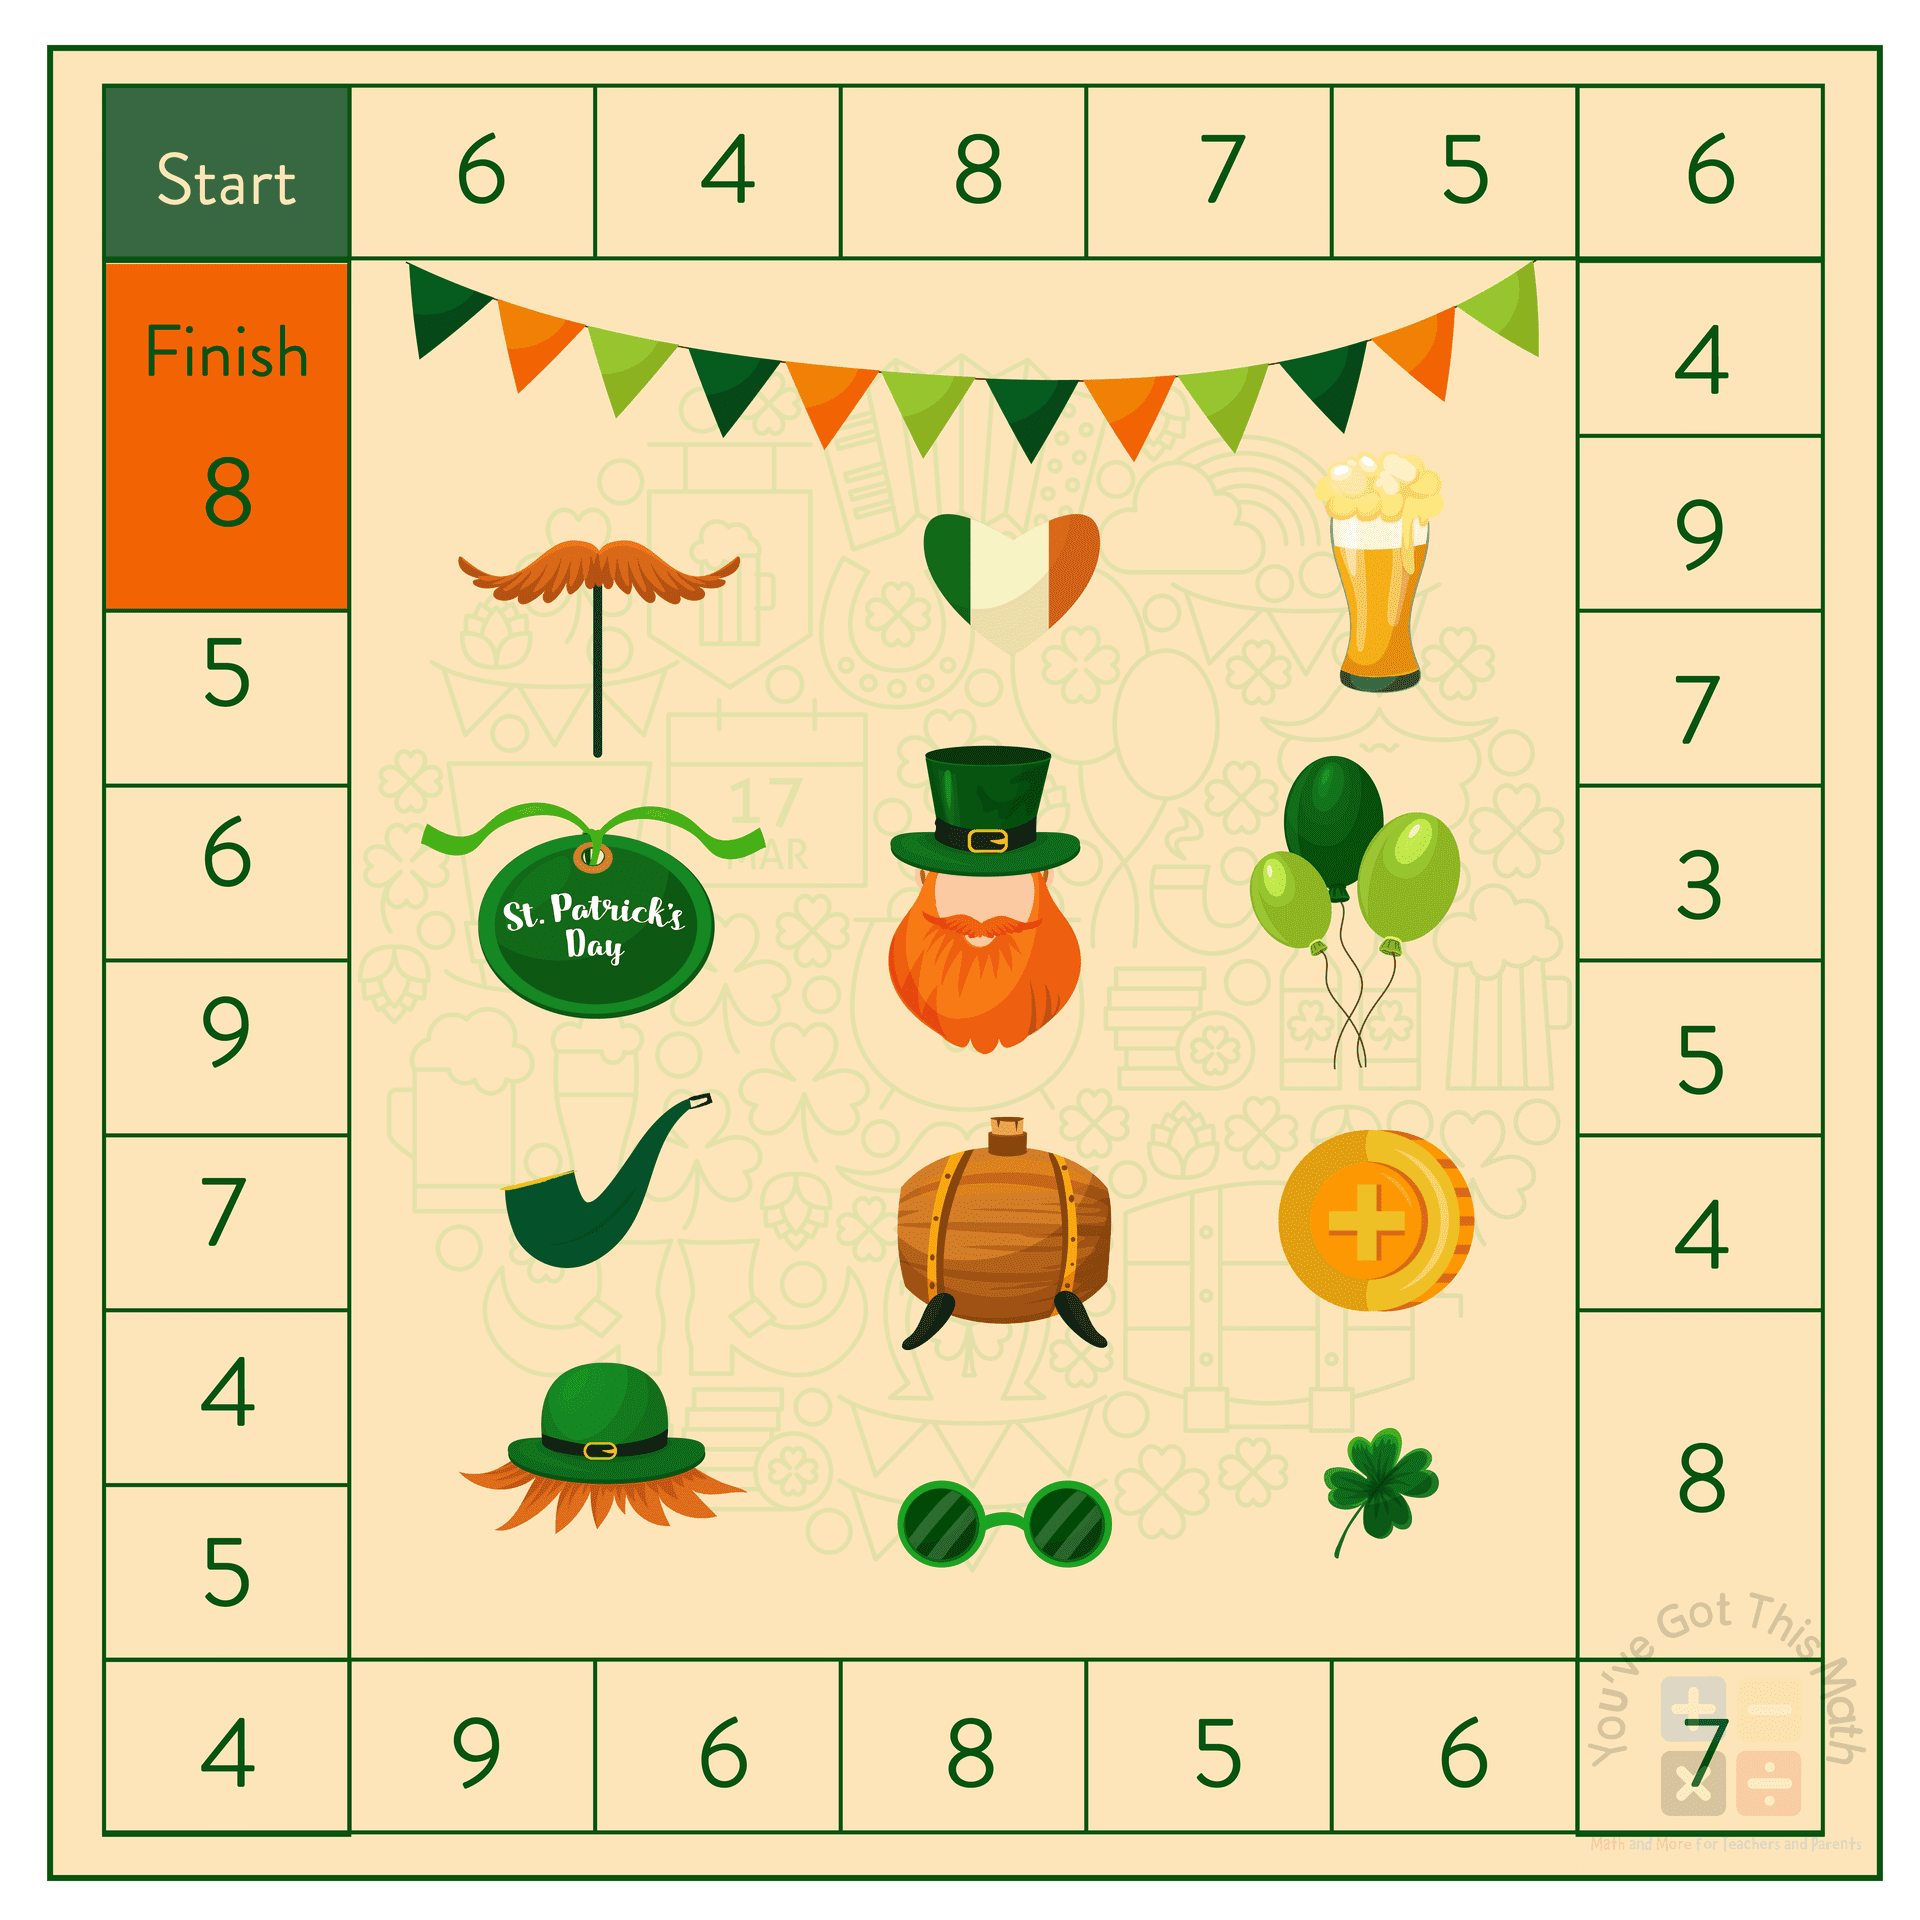 Roll Your Dice and Reach the Finish Spot First as A Saint Patrick's Day Math Riddle